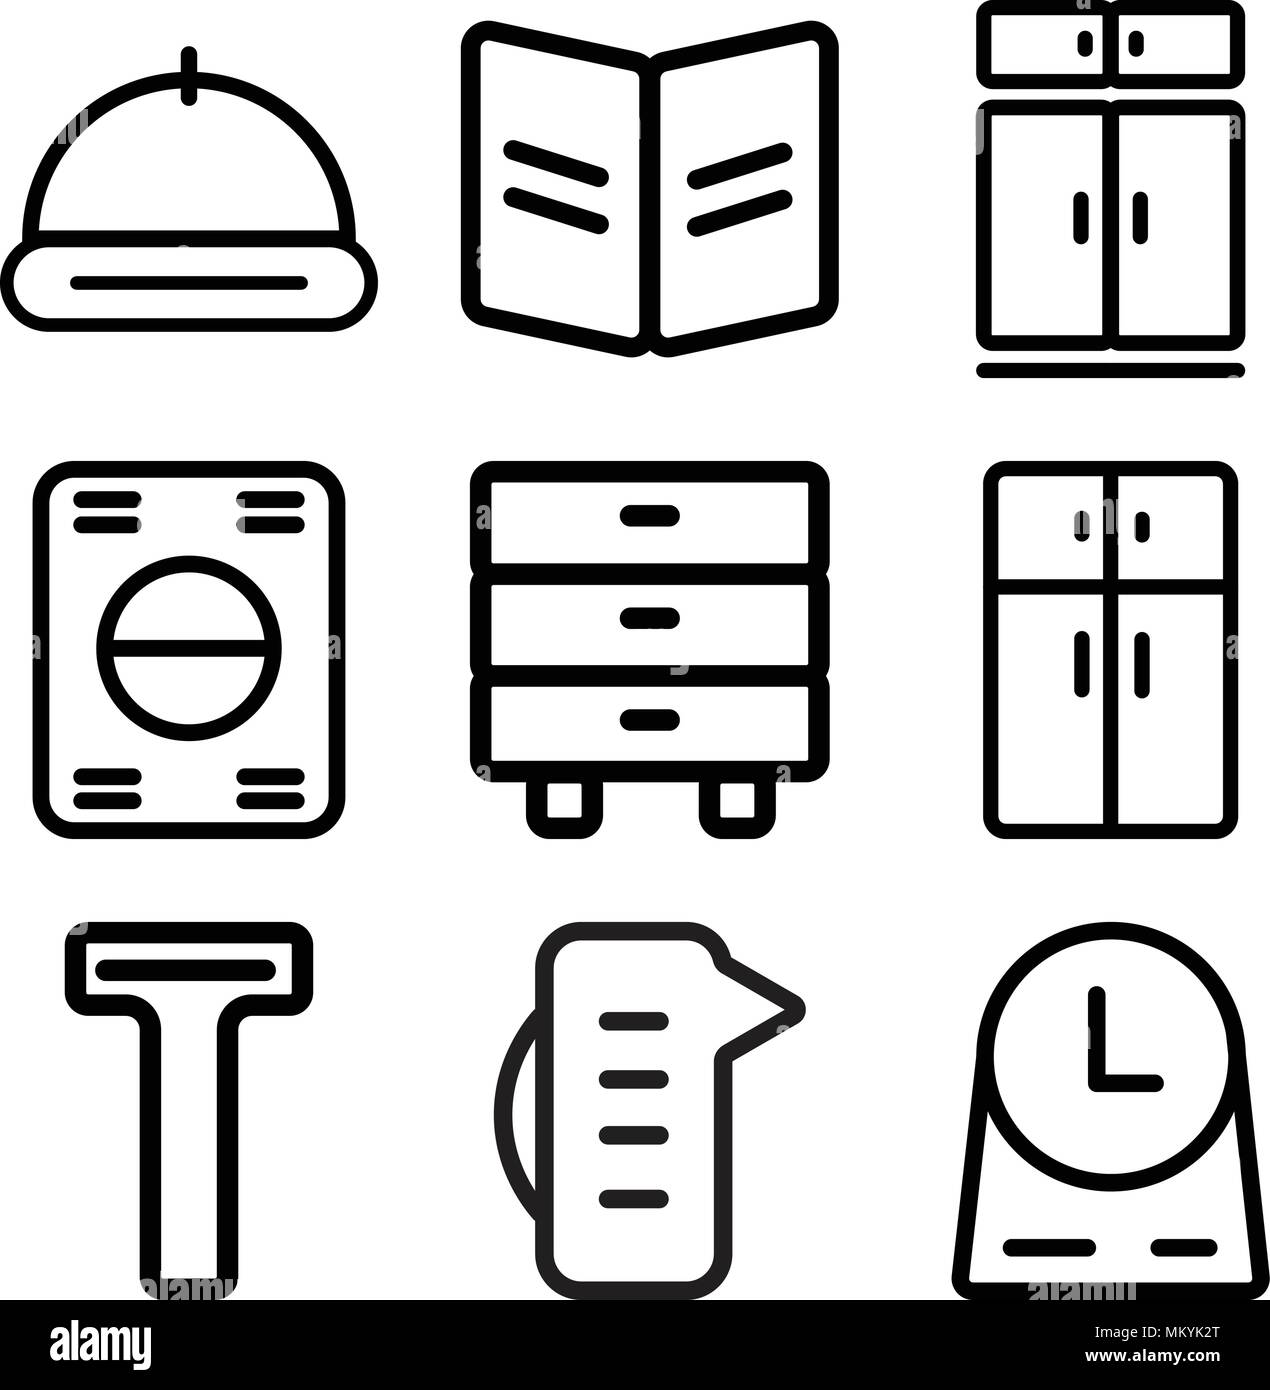 Set Of 9 simple editable icons such as Clock, Measuring cup, Bottle opener, Fridge, Cabinet, Washing machine, Recipe, Tray, can be used for mobile, we Stock Vector